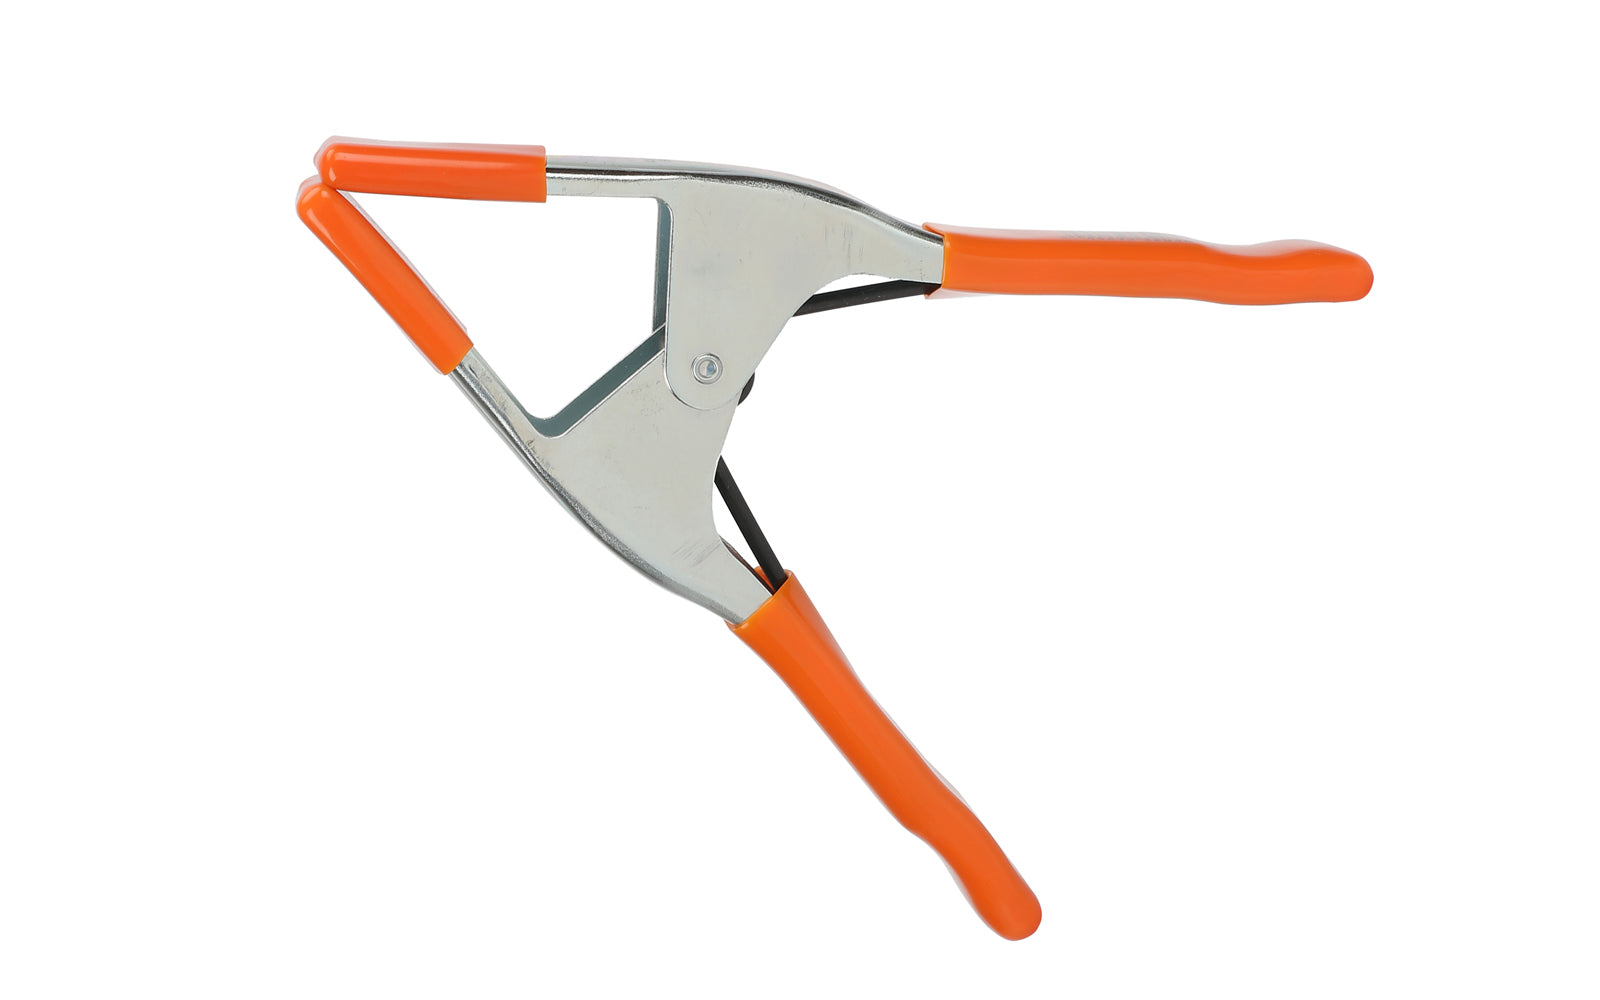 Pony 3" Opening Classic Spring Clamp ~ No. 3203-HT - Pony Jorgensen - With protected poly-vinyl handles & tips - Vinyl Cushion Handles - protected handles & jaw tips mean you can use them on metal, wood, plastic, fabric - Steel Spring Clamp ~ 044295320368